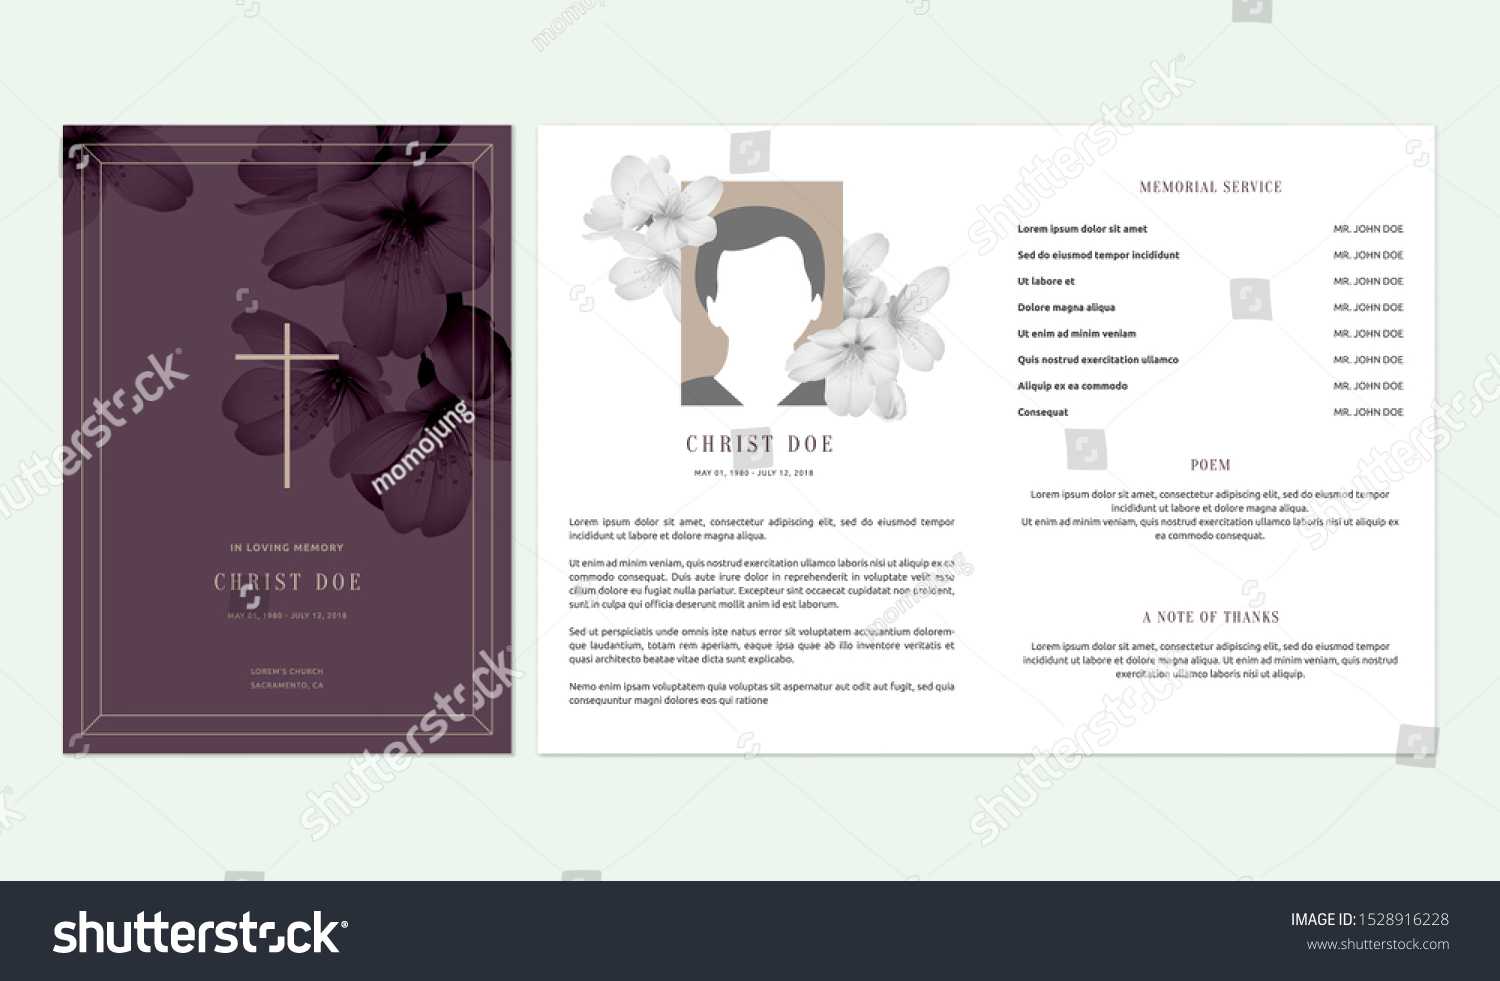 Floral Memorial Funeral Invitation Card Template | Royalty With Memorial Cards For Funeral Template Free